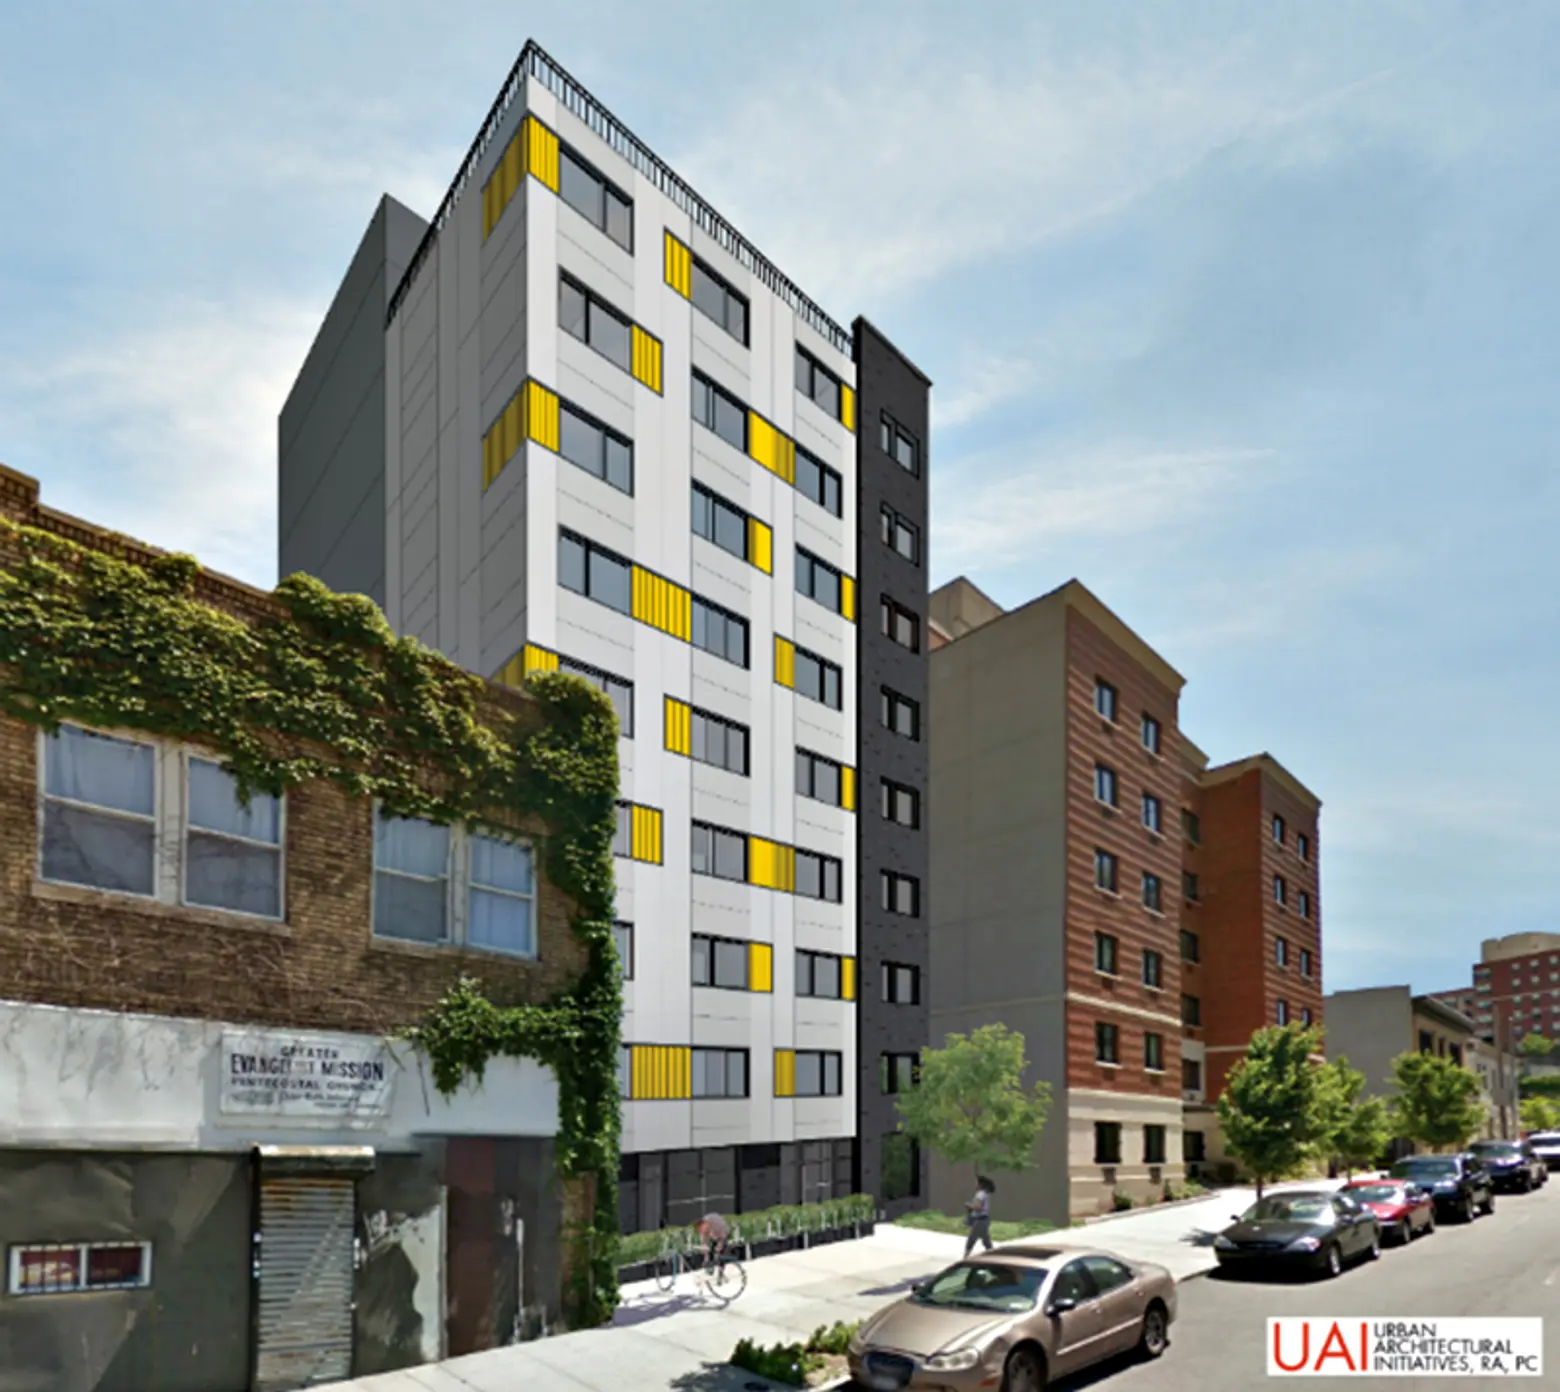 Apply for 20 Affordable Apartments on East 165th Street, Starting at $690/Month